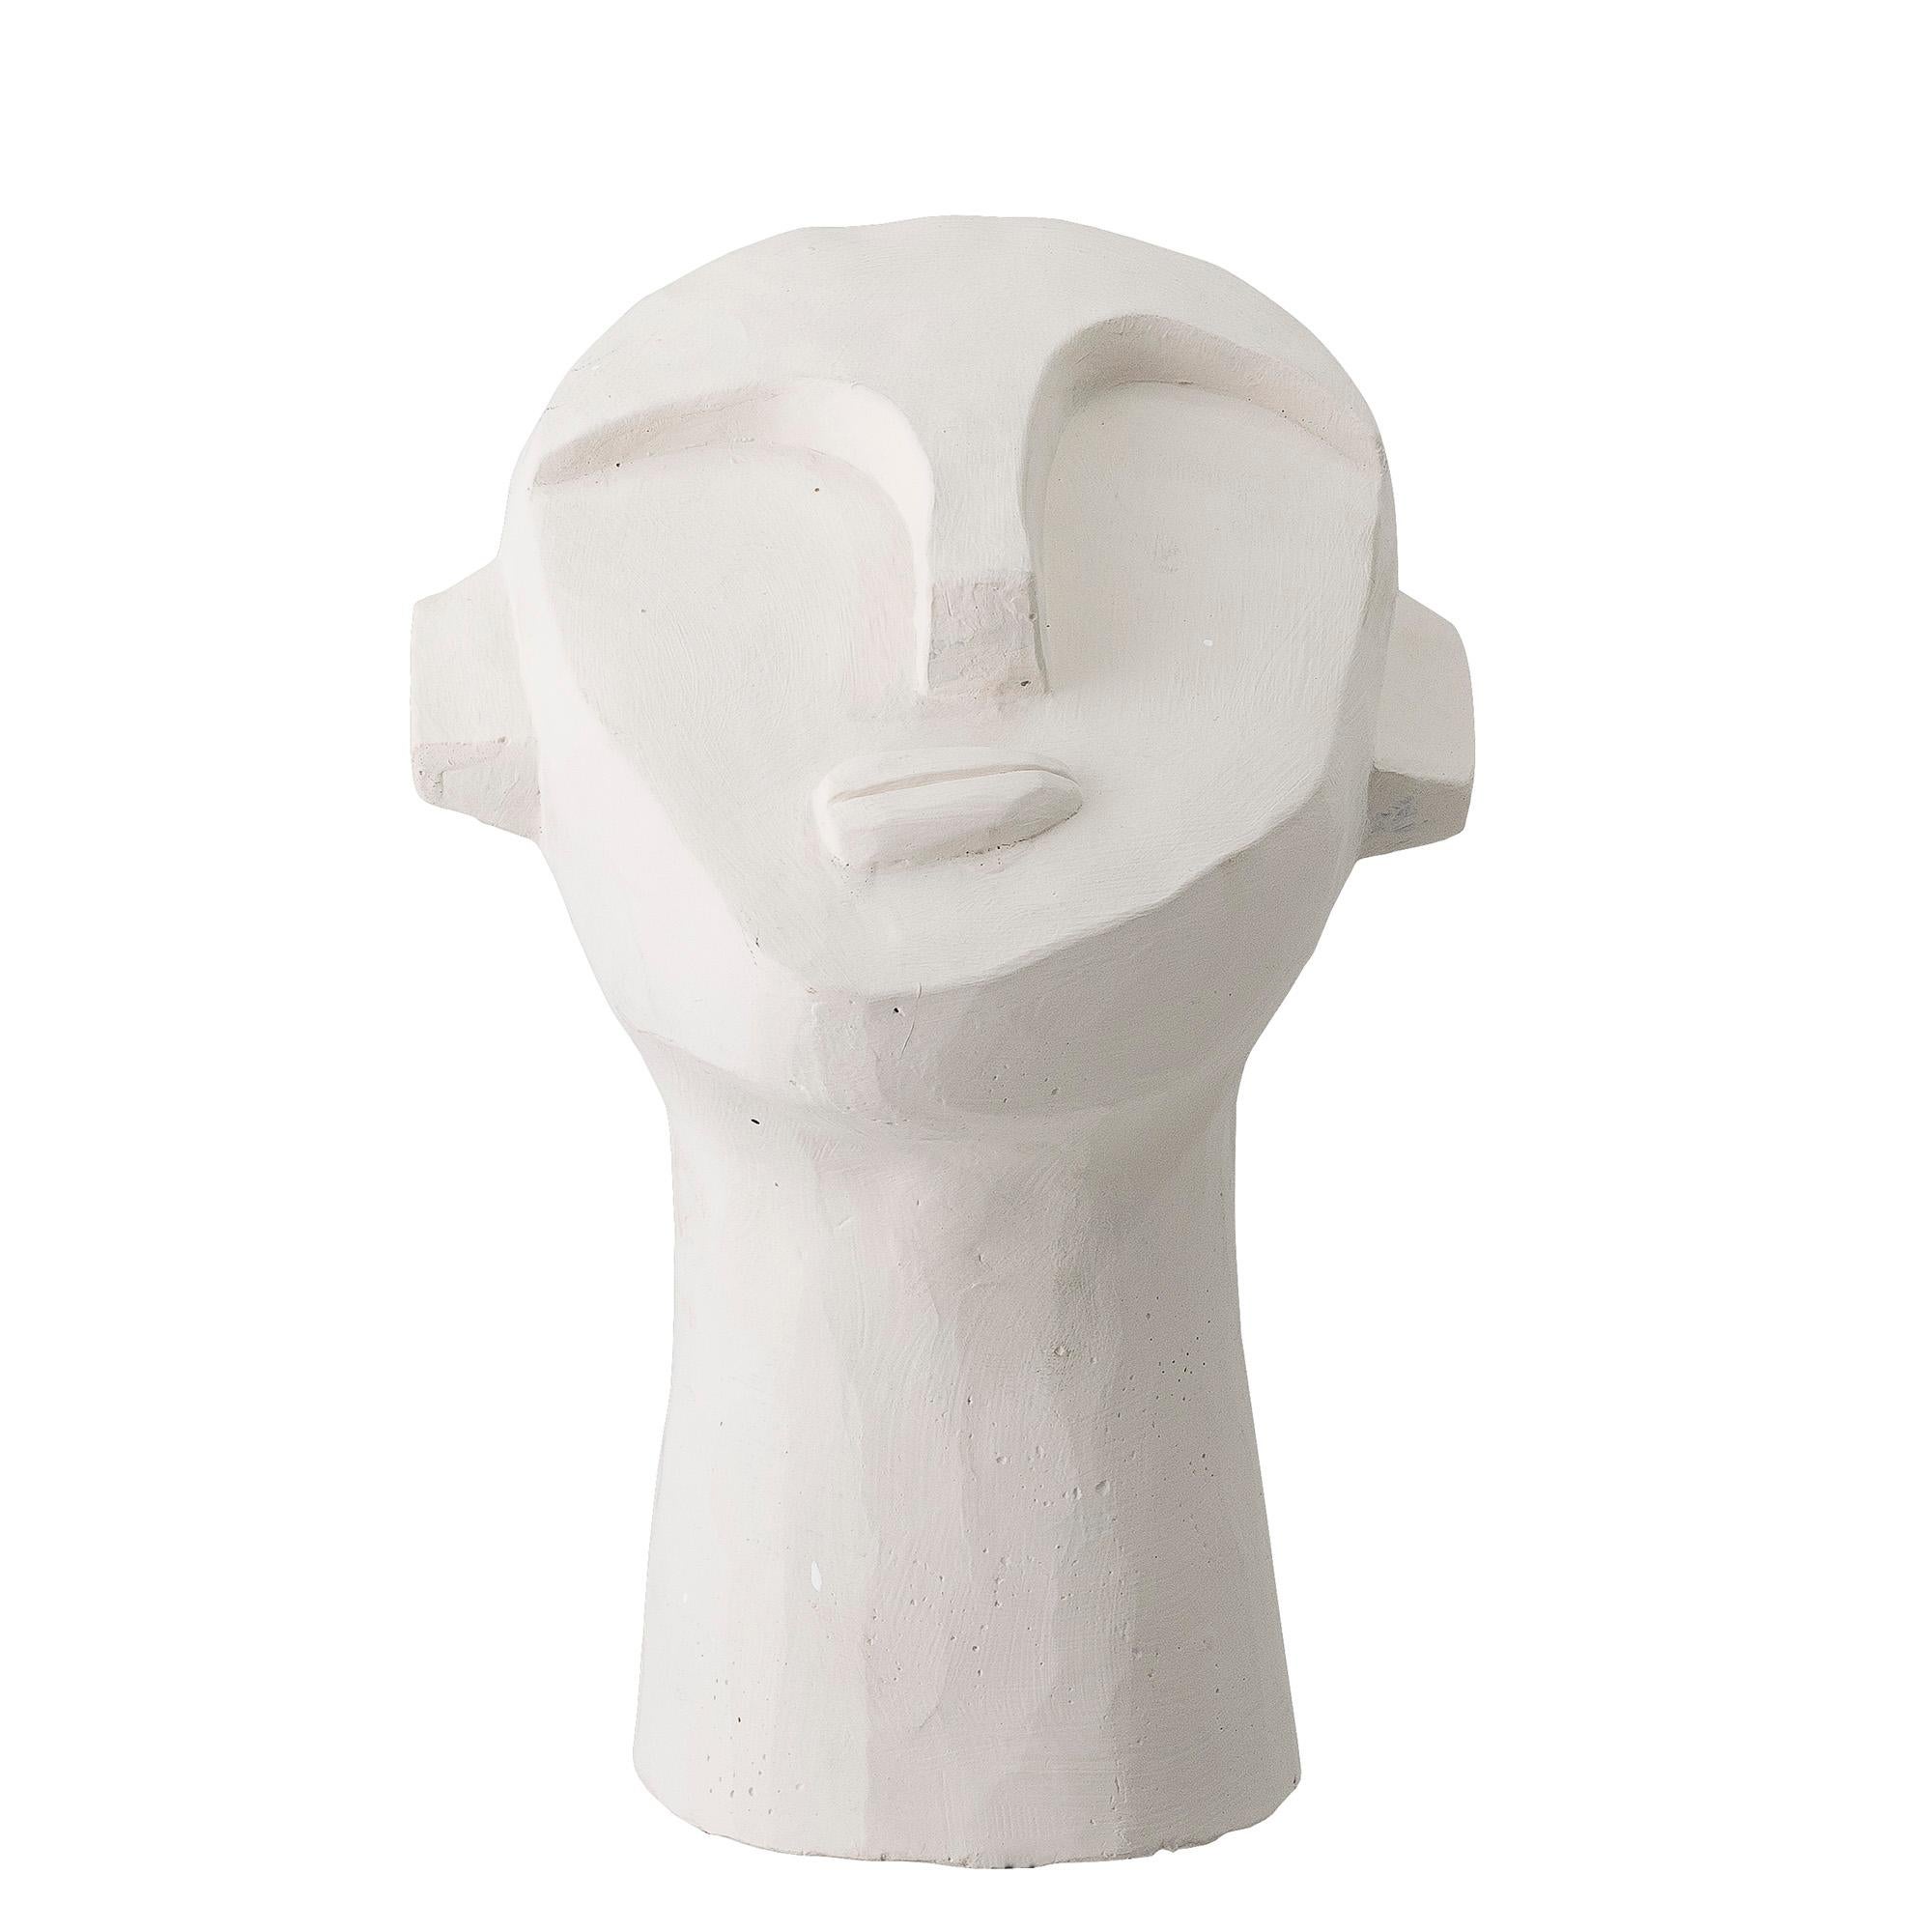 White cement cast molded Brutalist style face mask tabletop sculpture.